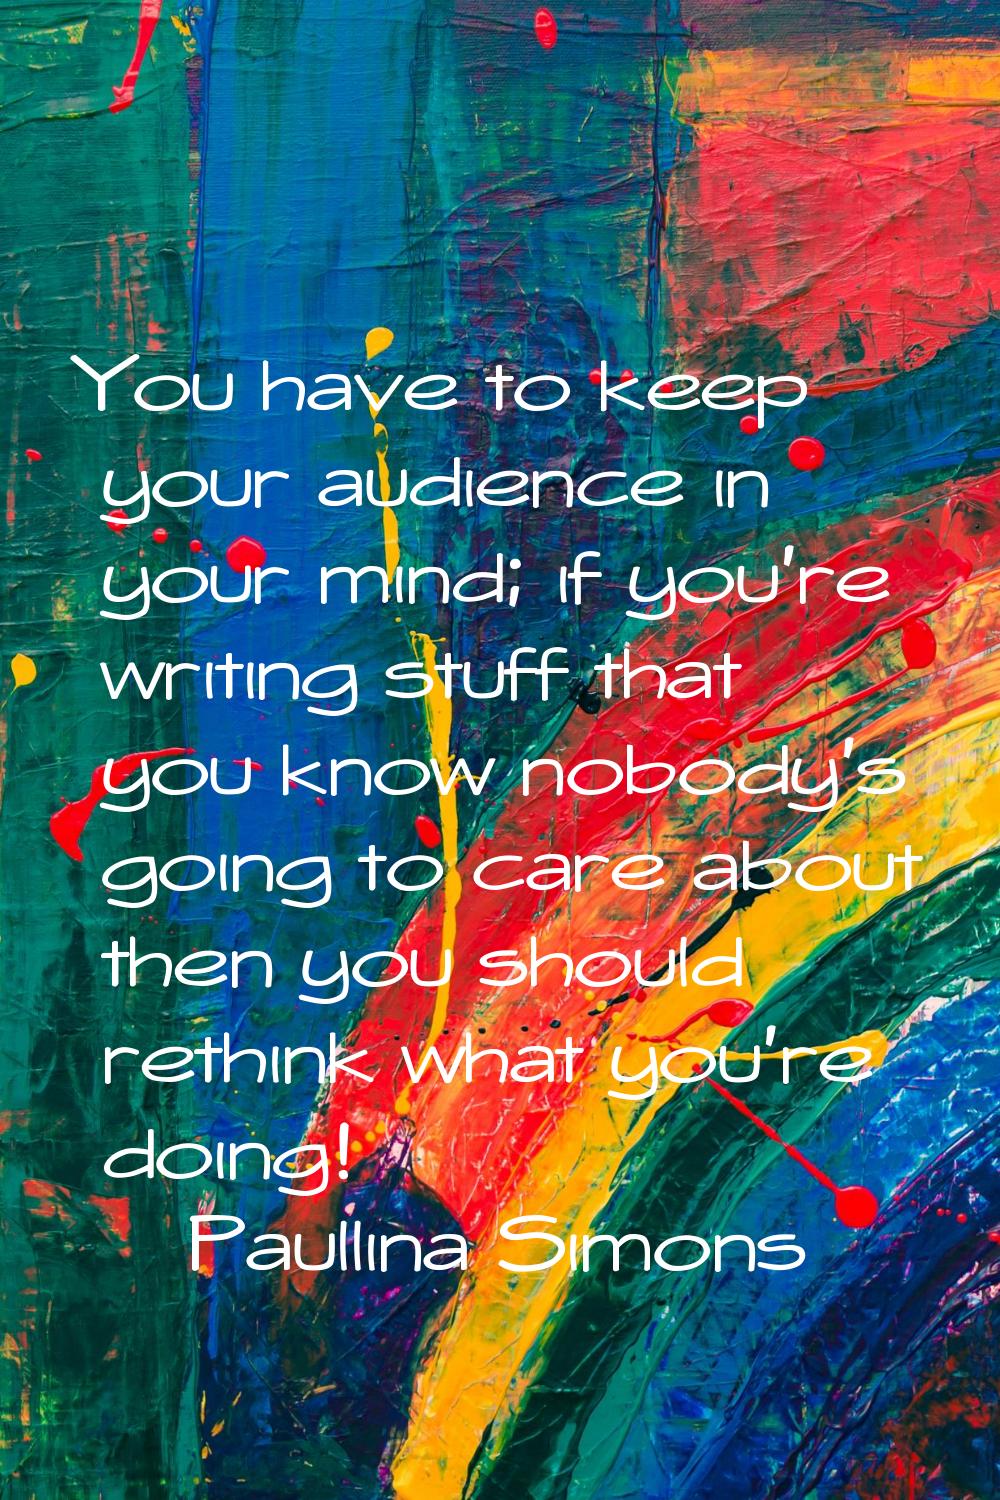 You have to keep your audience in your mind; if you're writing stuff that you know nobody's going t